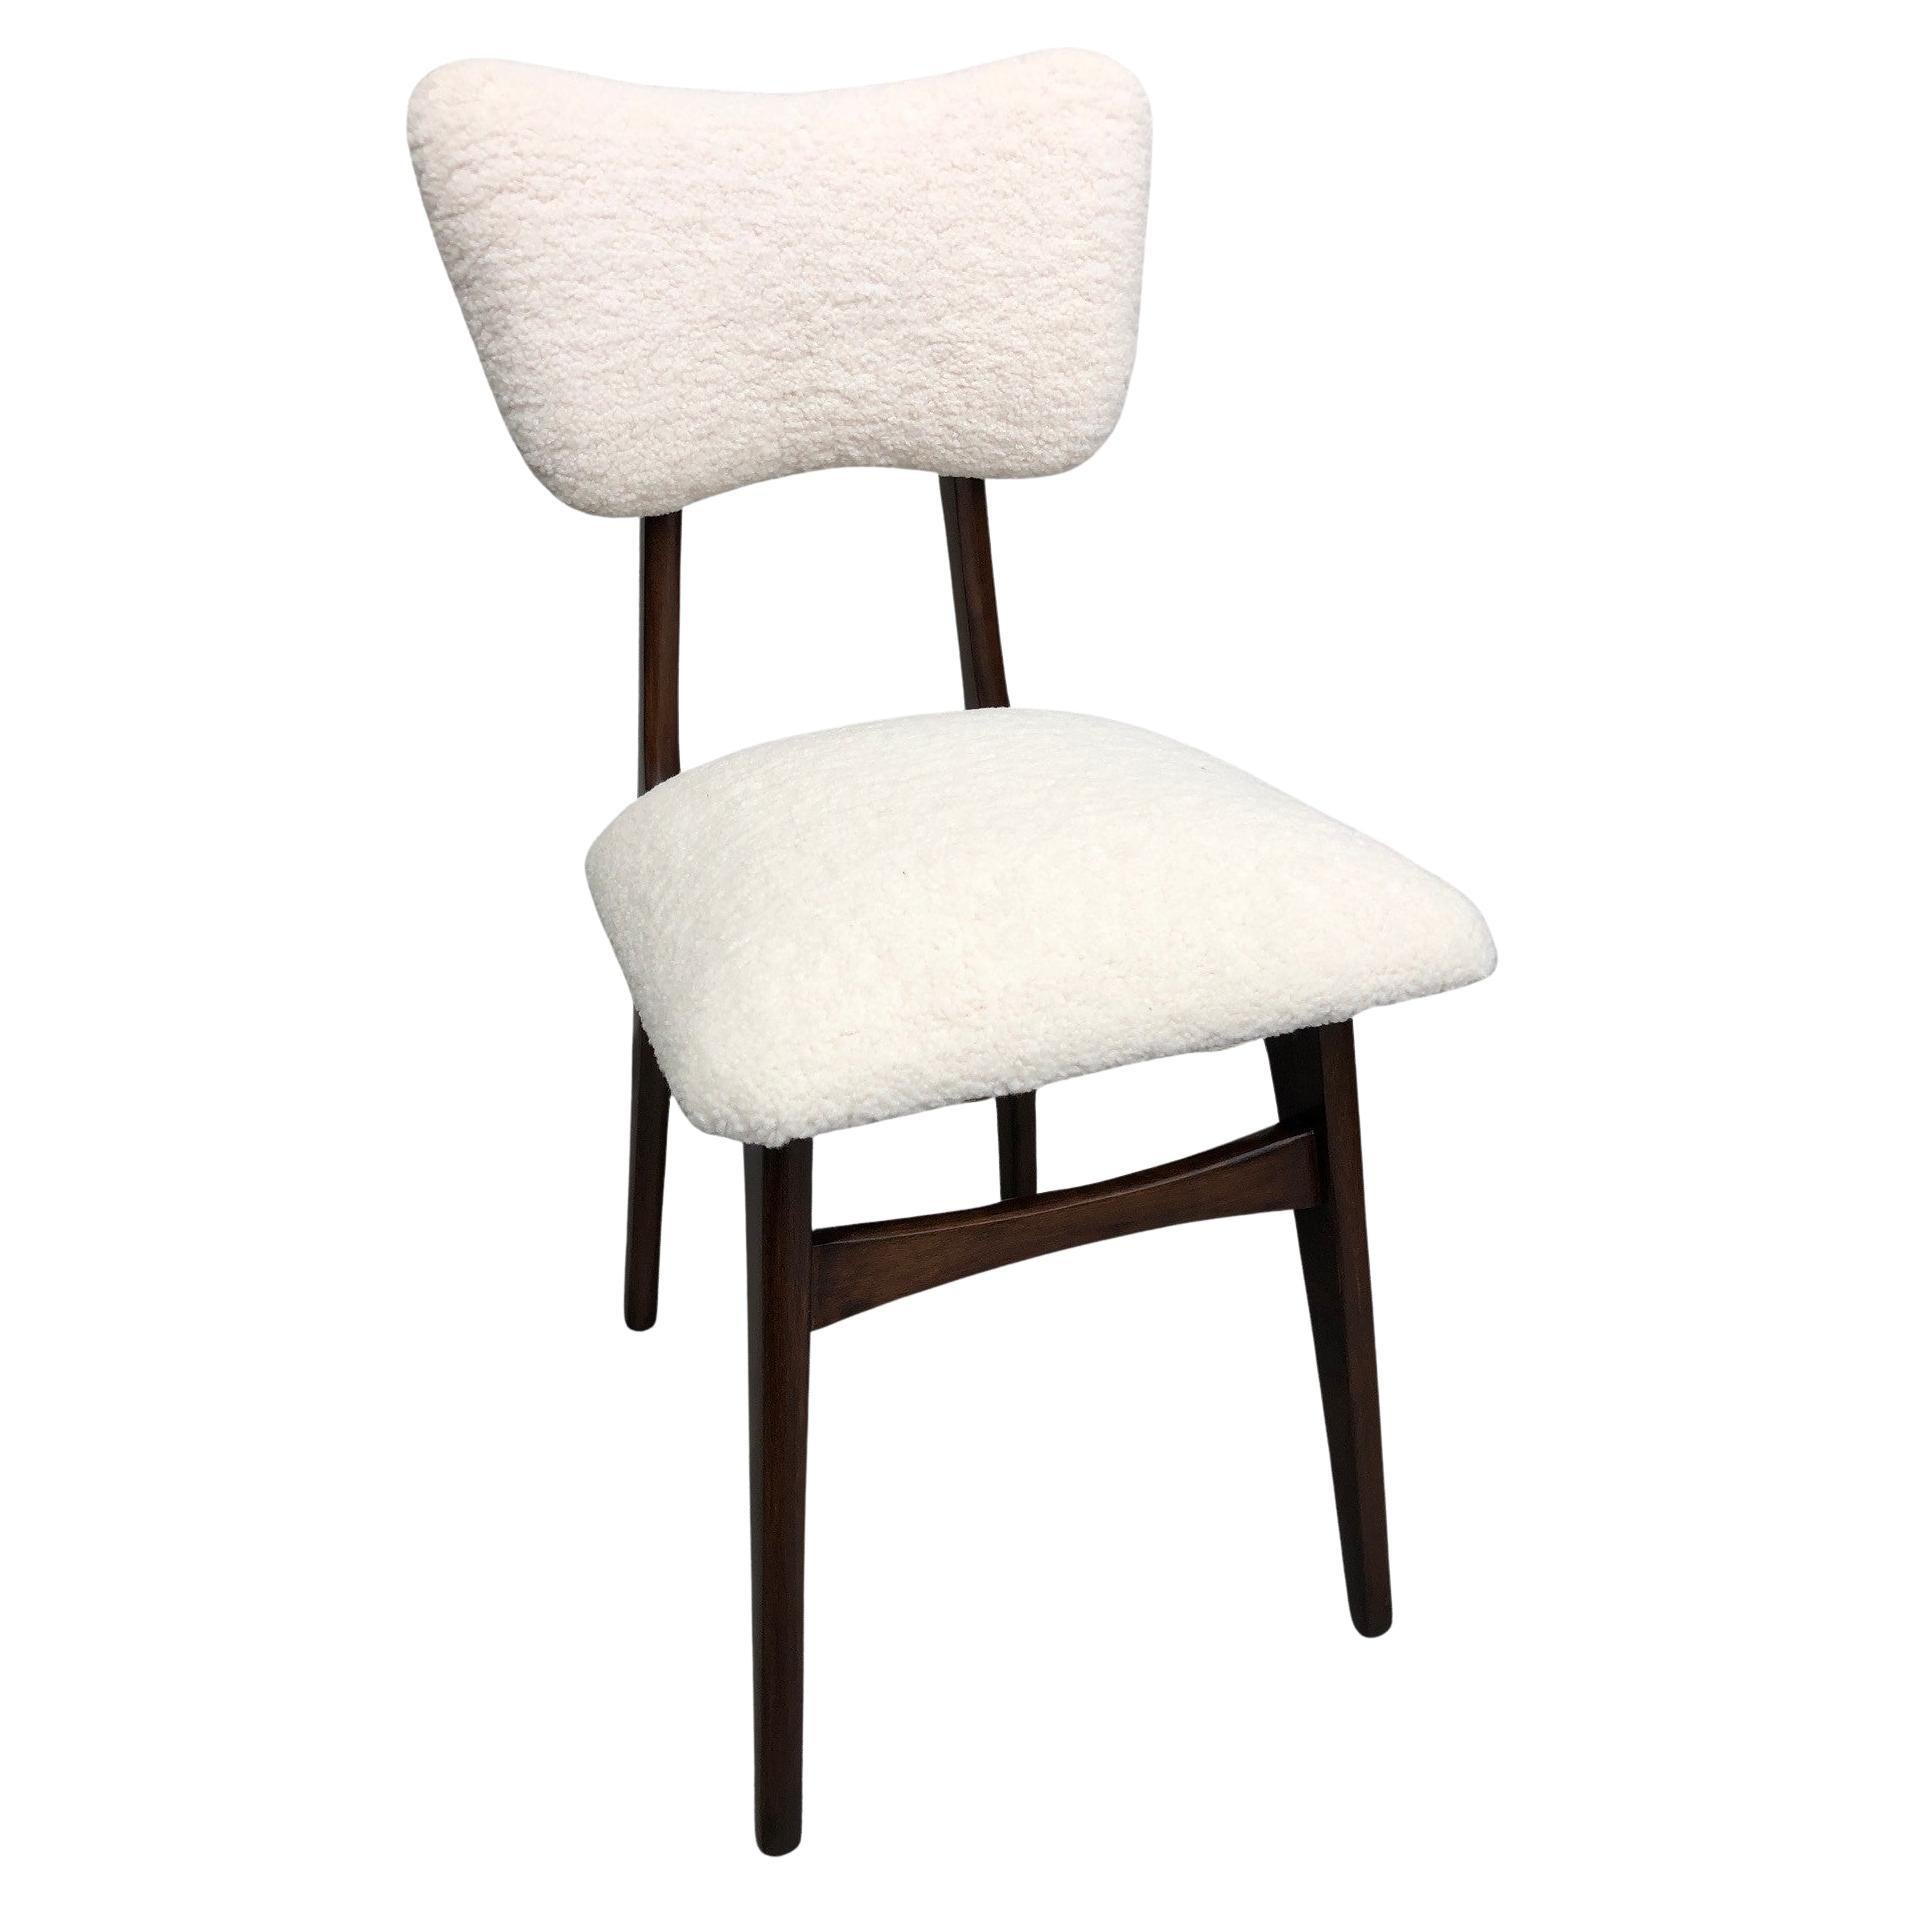 Mid-Century Beige Boucle and Dark Wood Dining Chair, Europe, 1960s For Sale